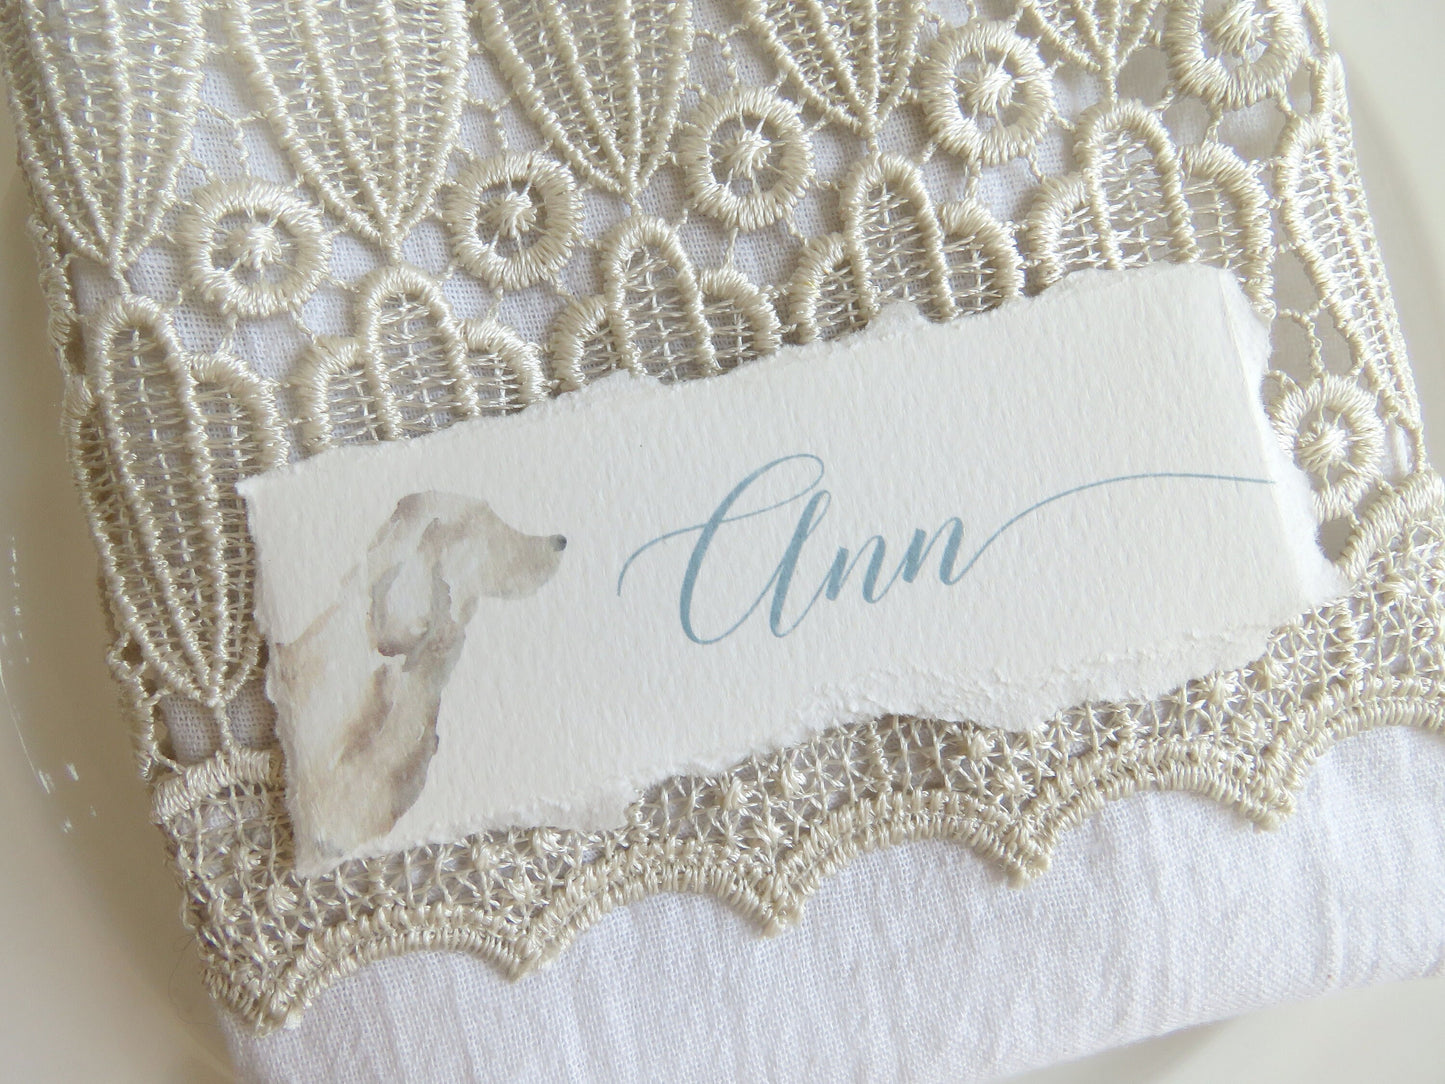 Wedding Name Cards | Wedding Place Cards Name Escort Cards - Puppy